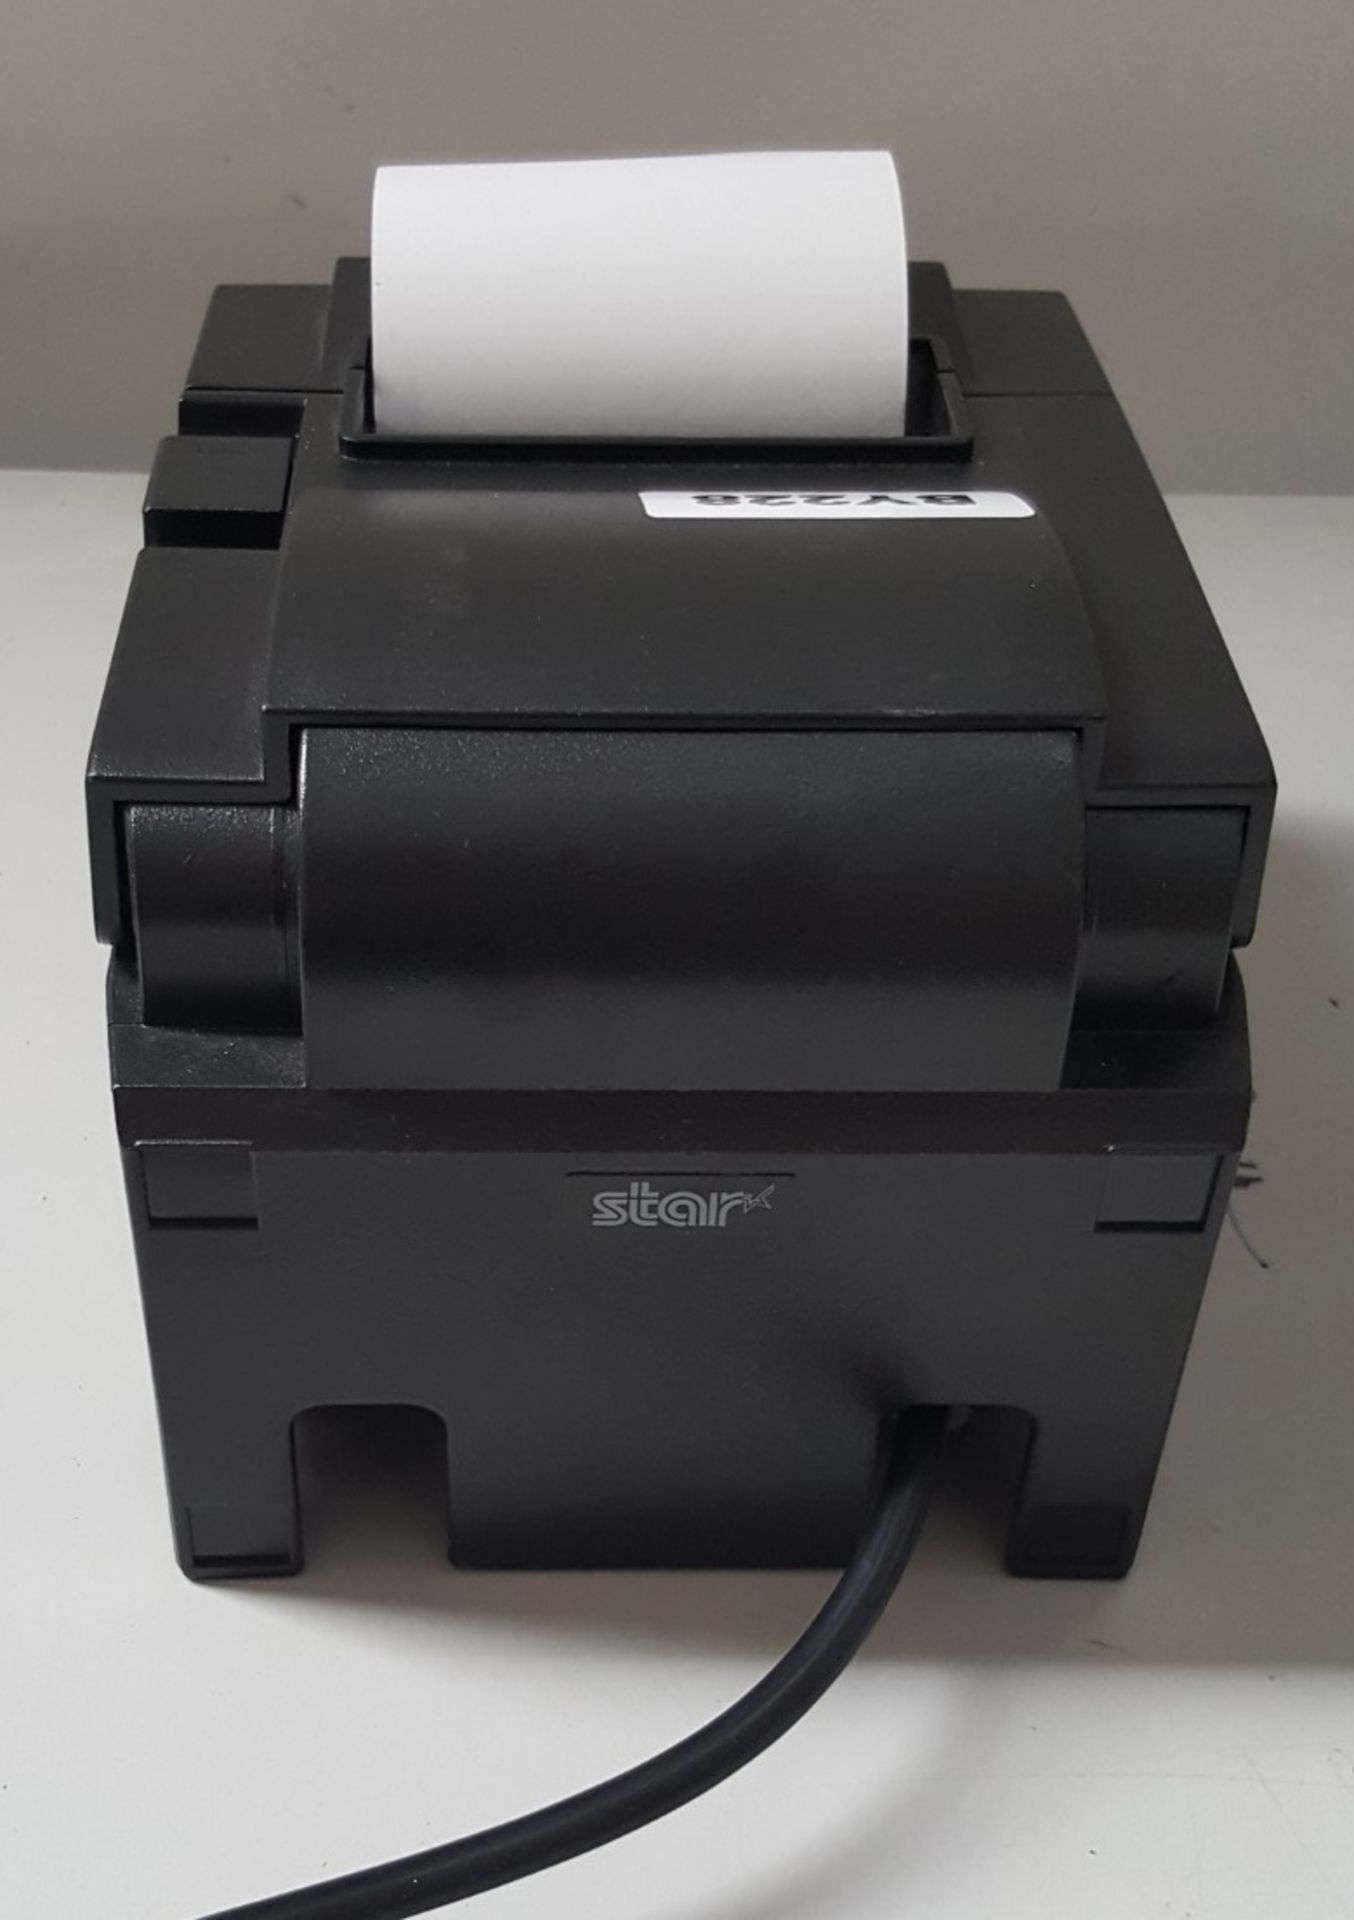 1 x Star Micronics TSP100 Thermal Receipt Printer - Ref BY228 - Image 3 of 5